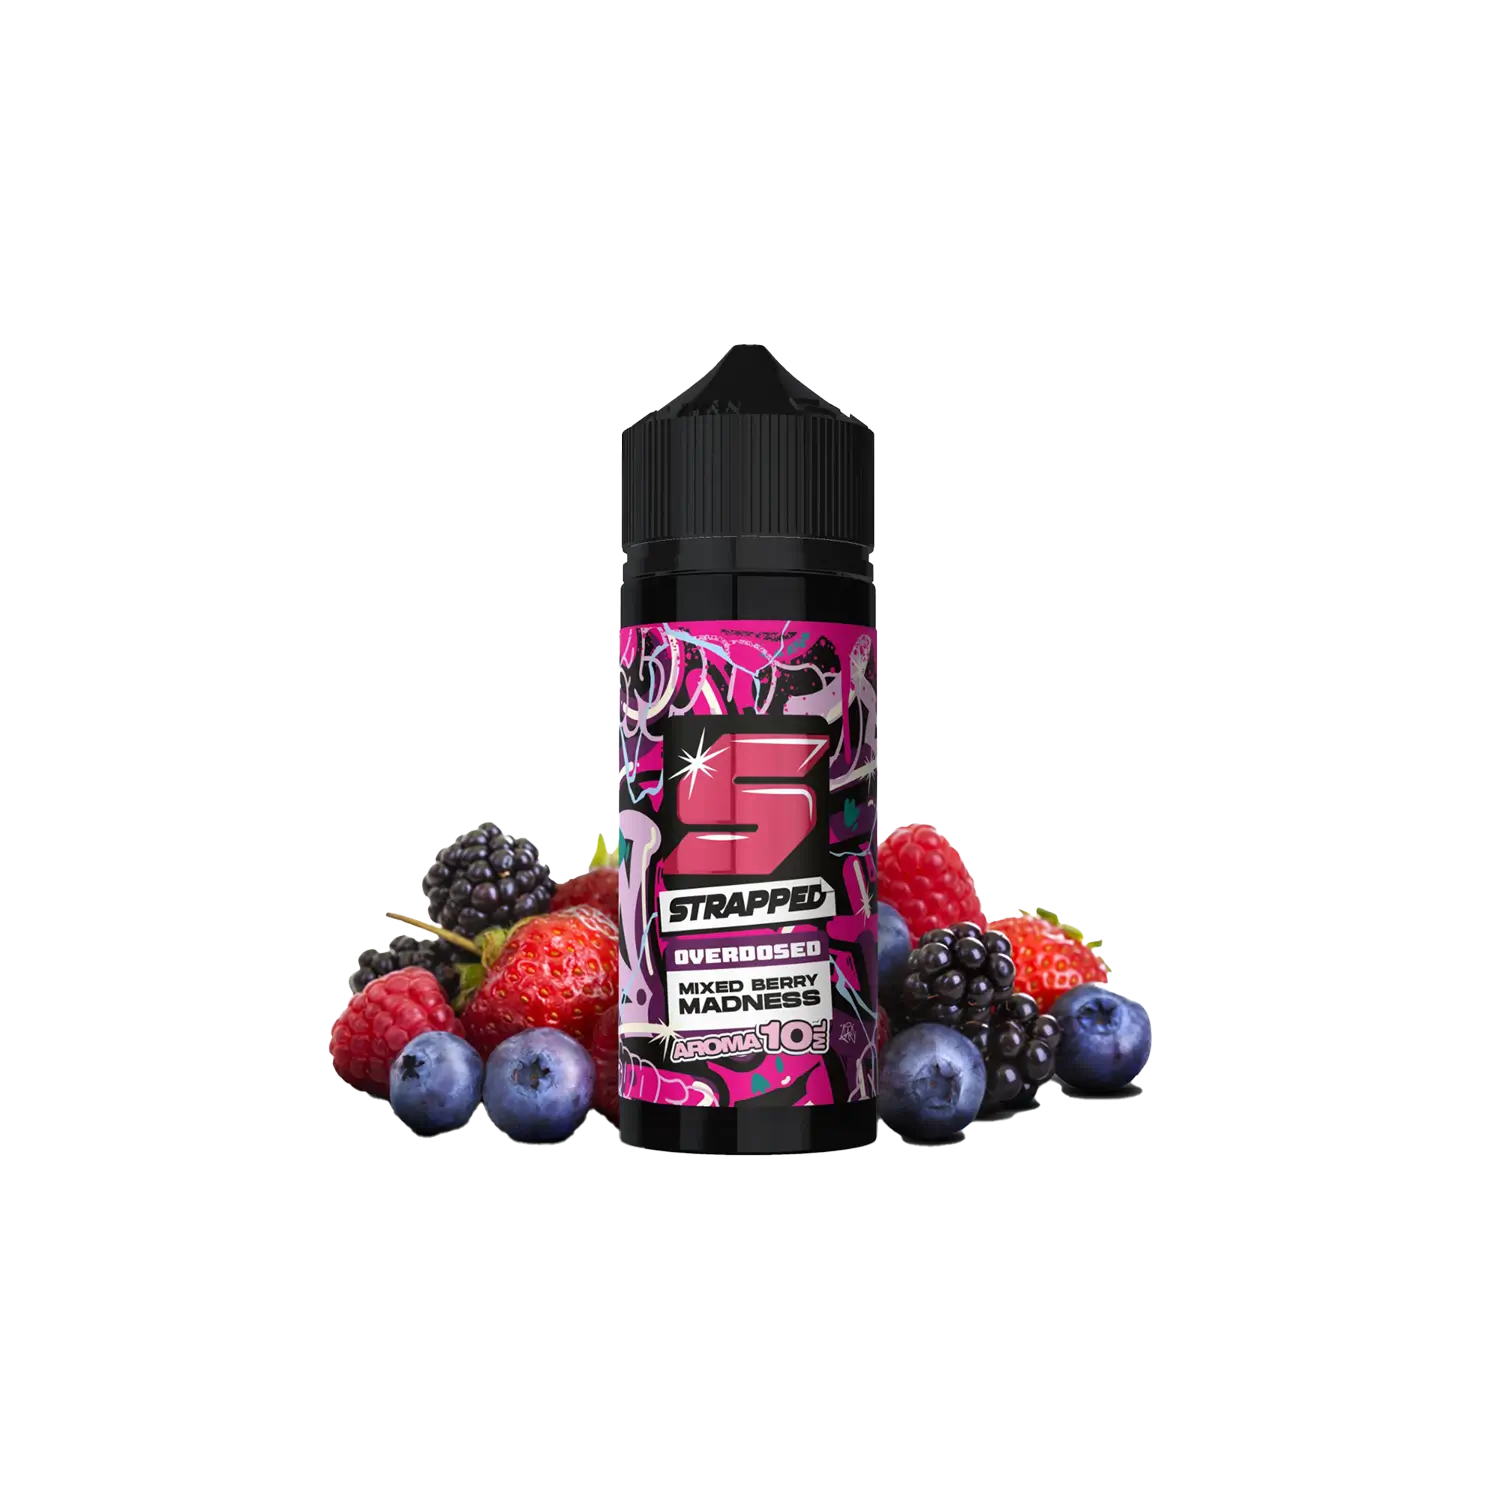 Strapped Overdosed - Mixed Berry Madness 10 ml Aroma